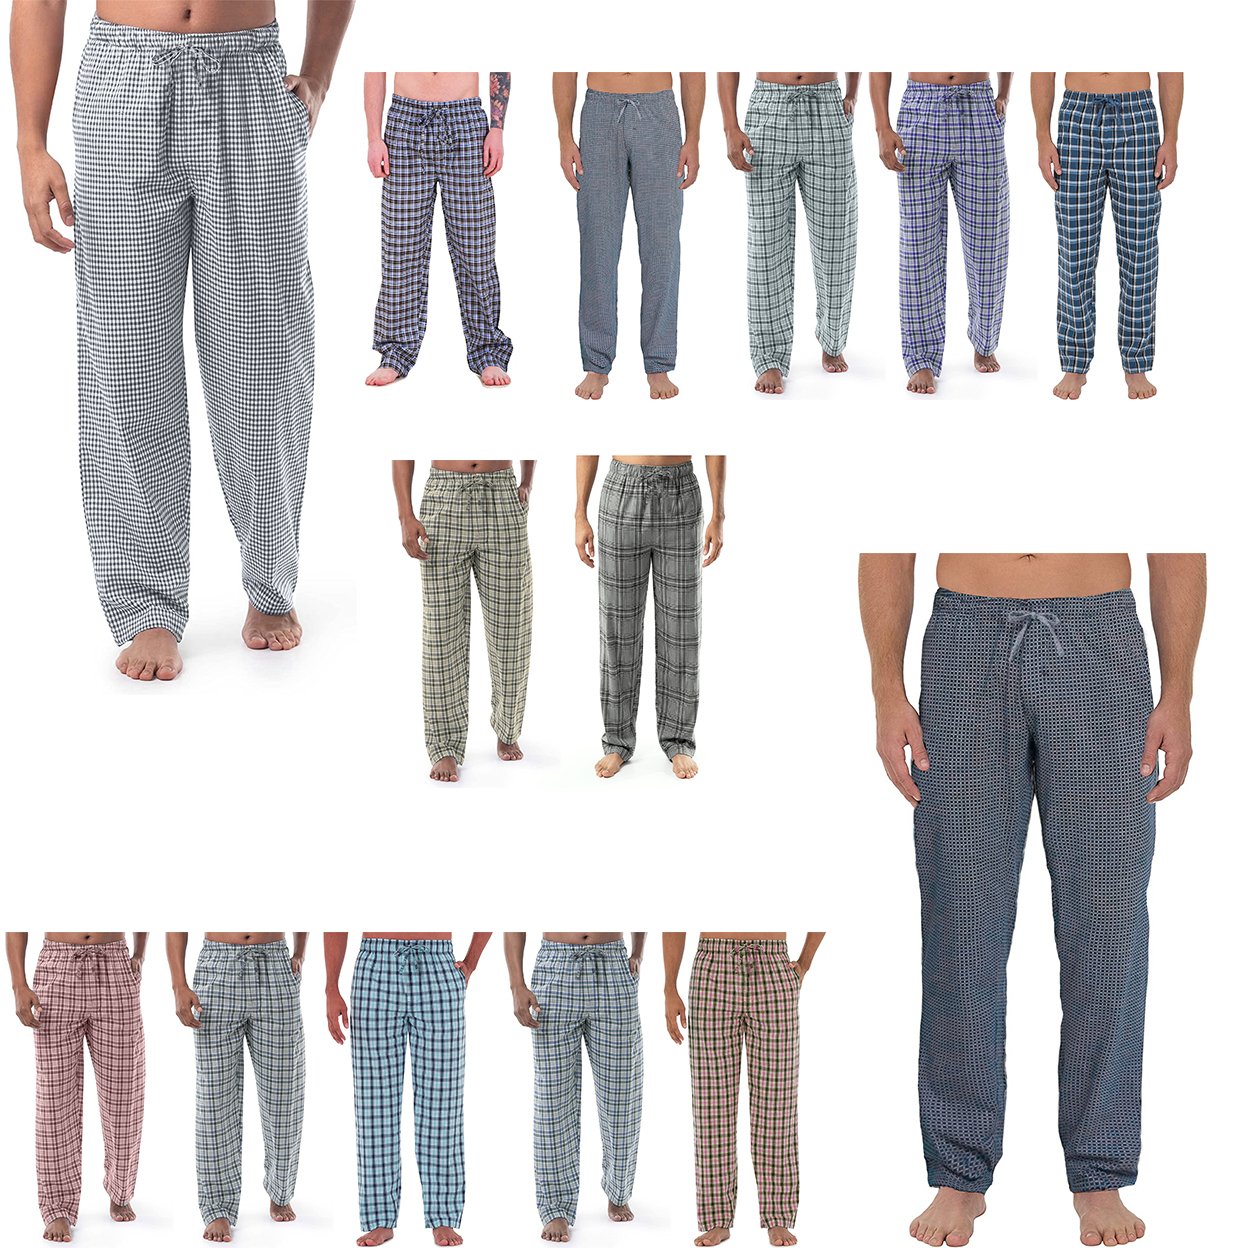 3-Pack: Men's Soft Jersey Knit Long Lounge Sleep Pants With Pockets - Plaid, X-Large